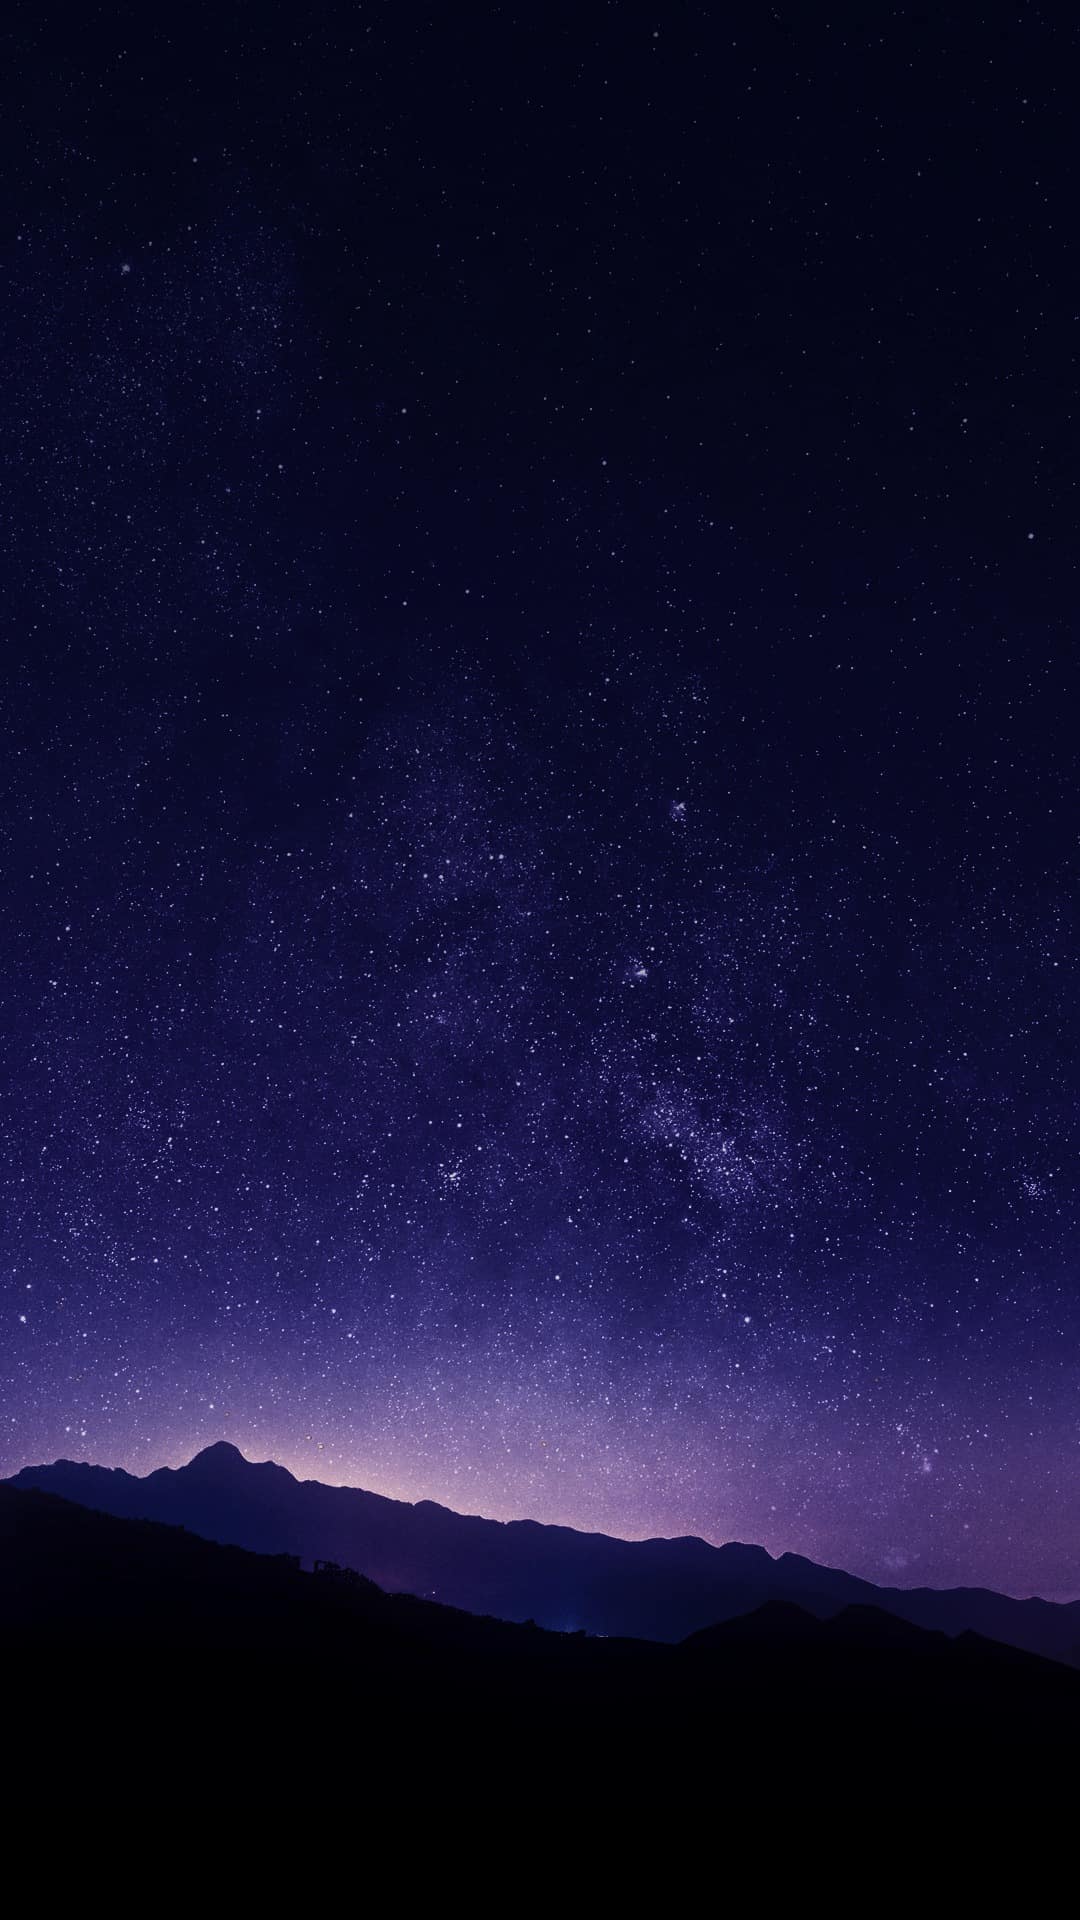 Flyme-OS-6-Wallpapers